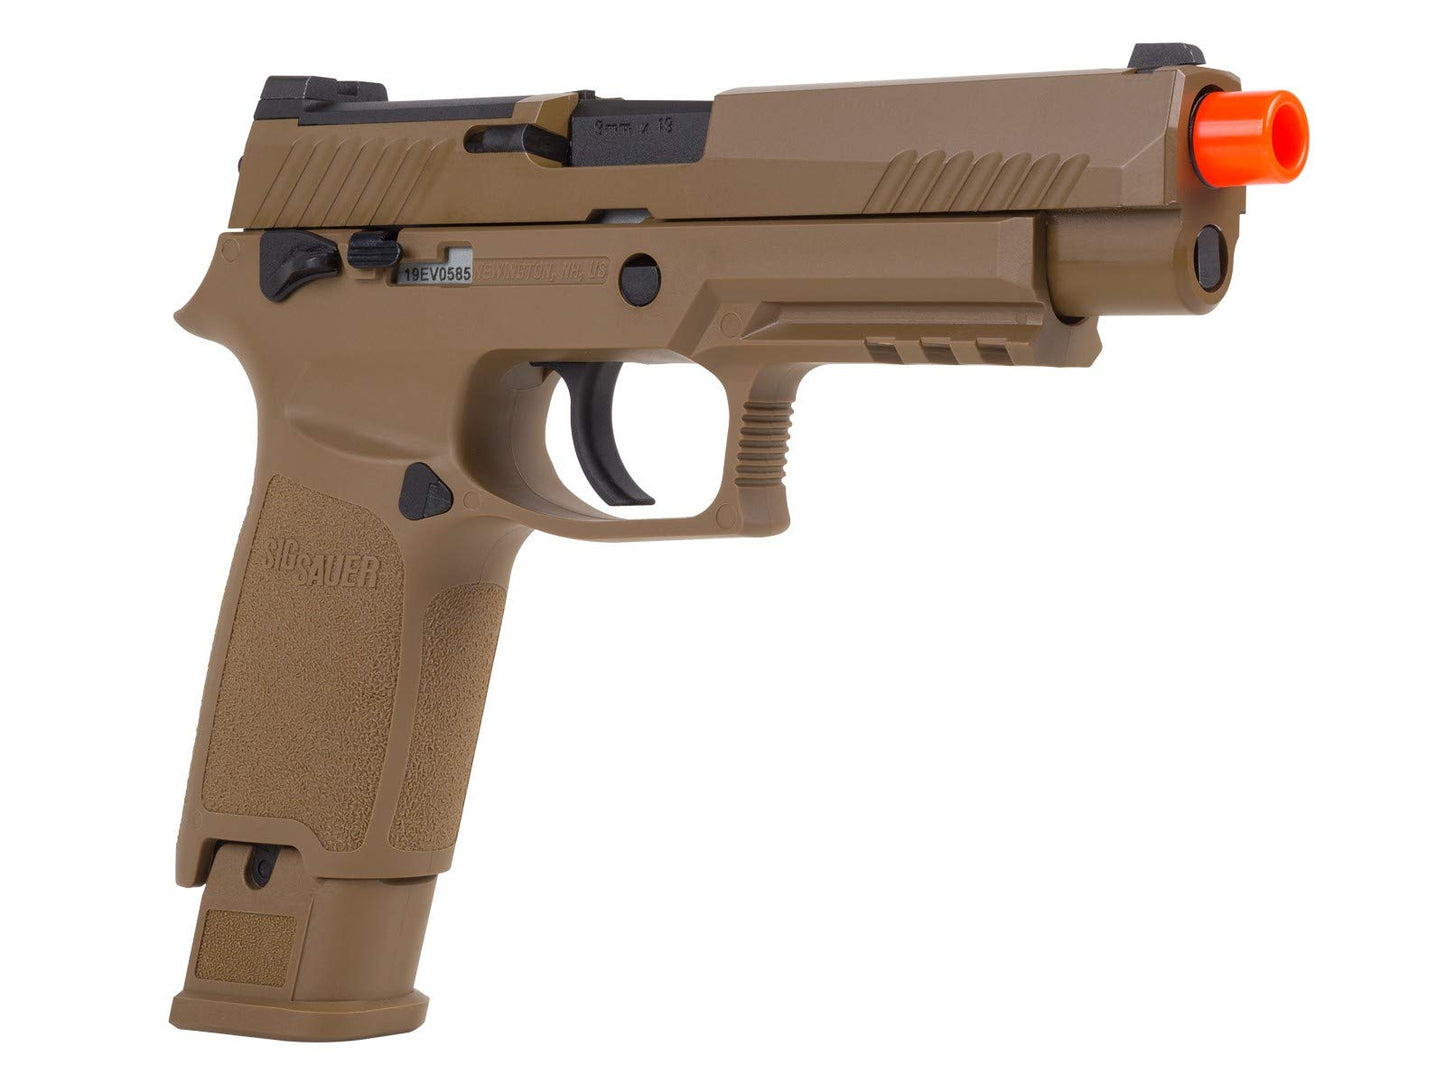 Airsoft Proforce M17, 6mm, 5.5", 21rd, CO2 Power Source, Coyote Tan